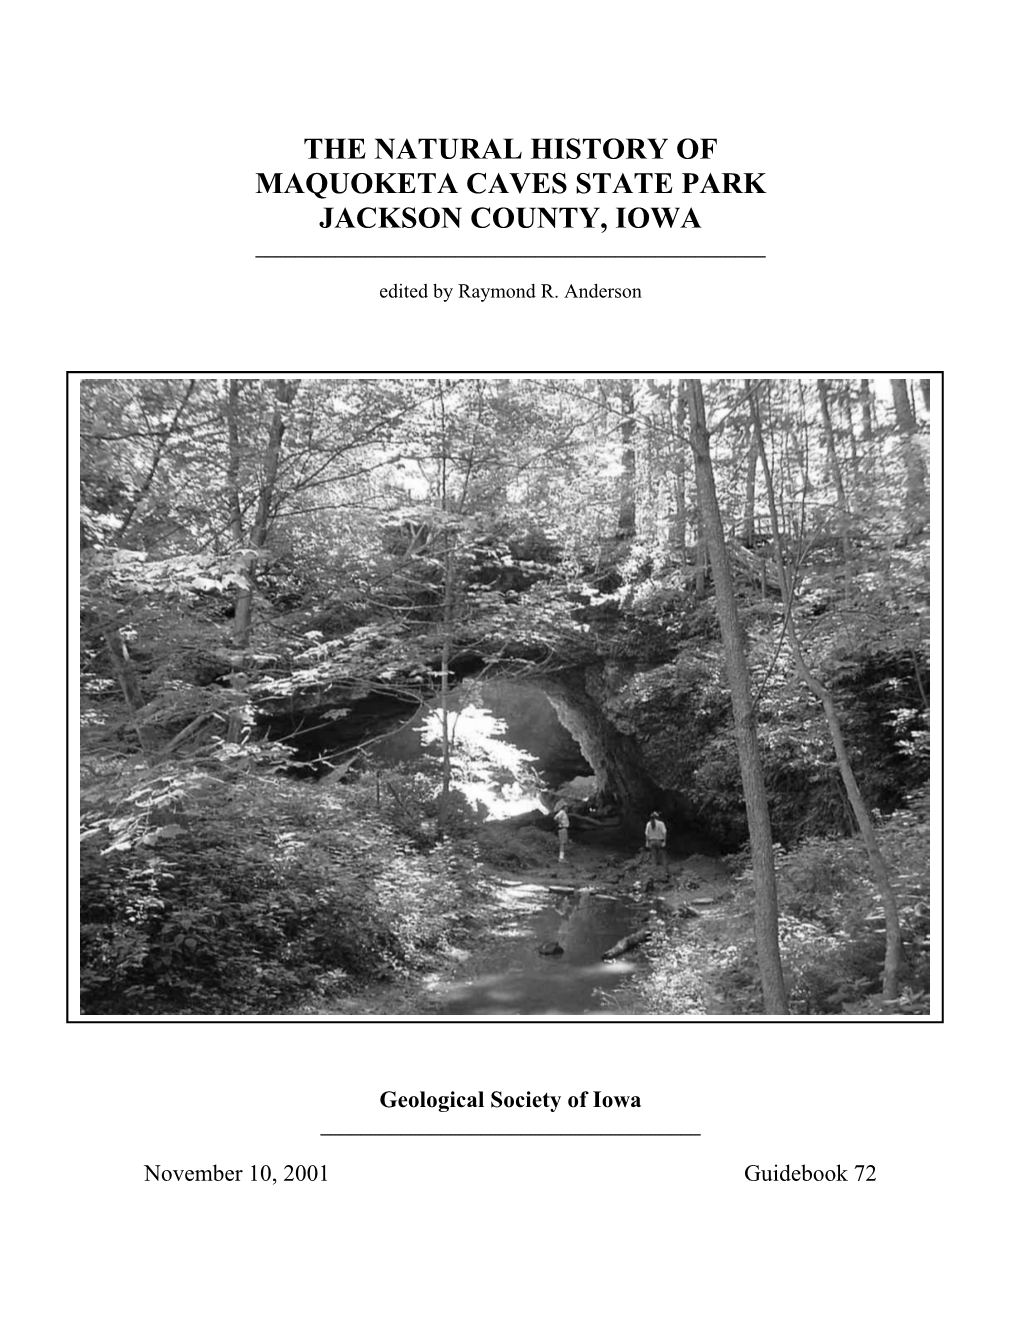 The Natural History of Maquoketa Caves State Park Jackson County, Iowa ______